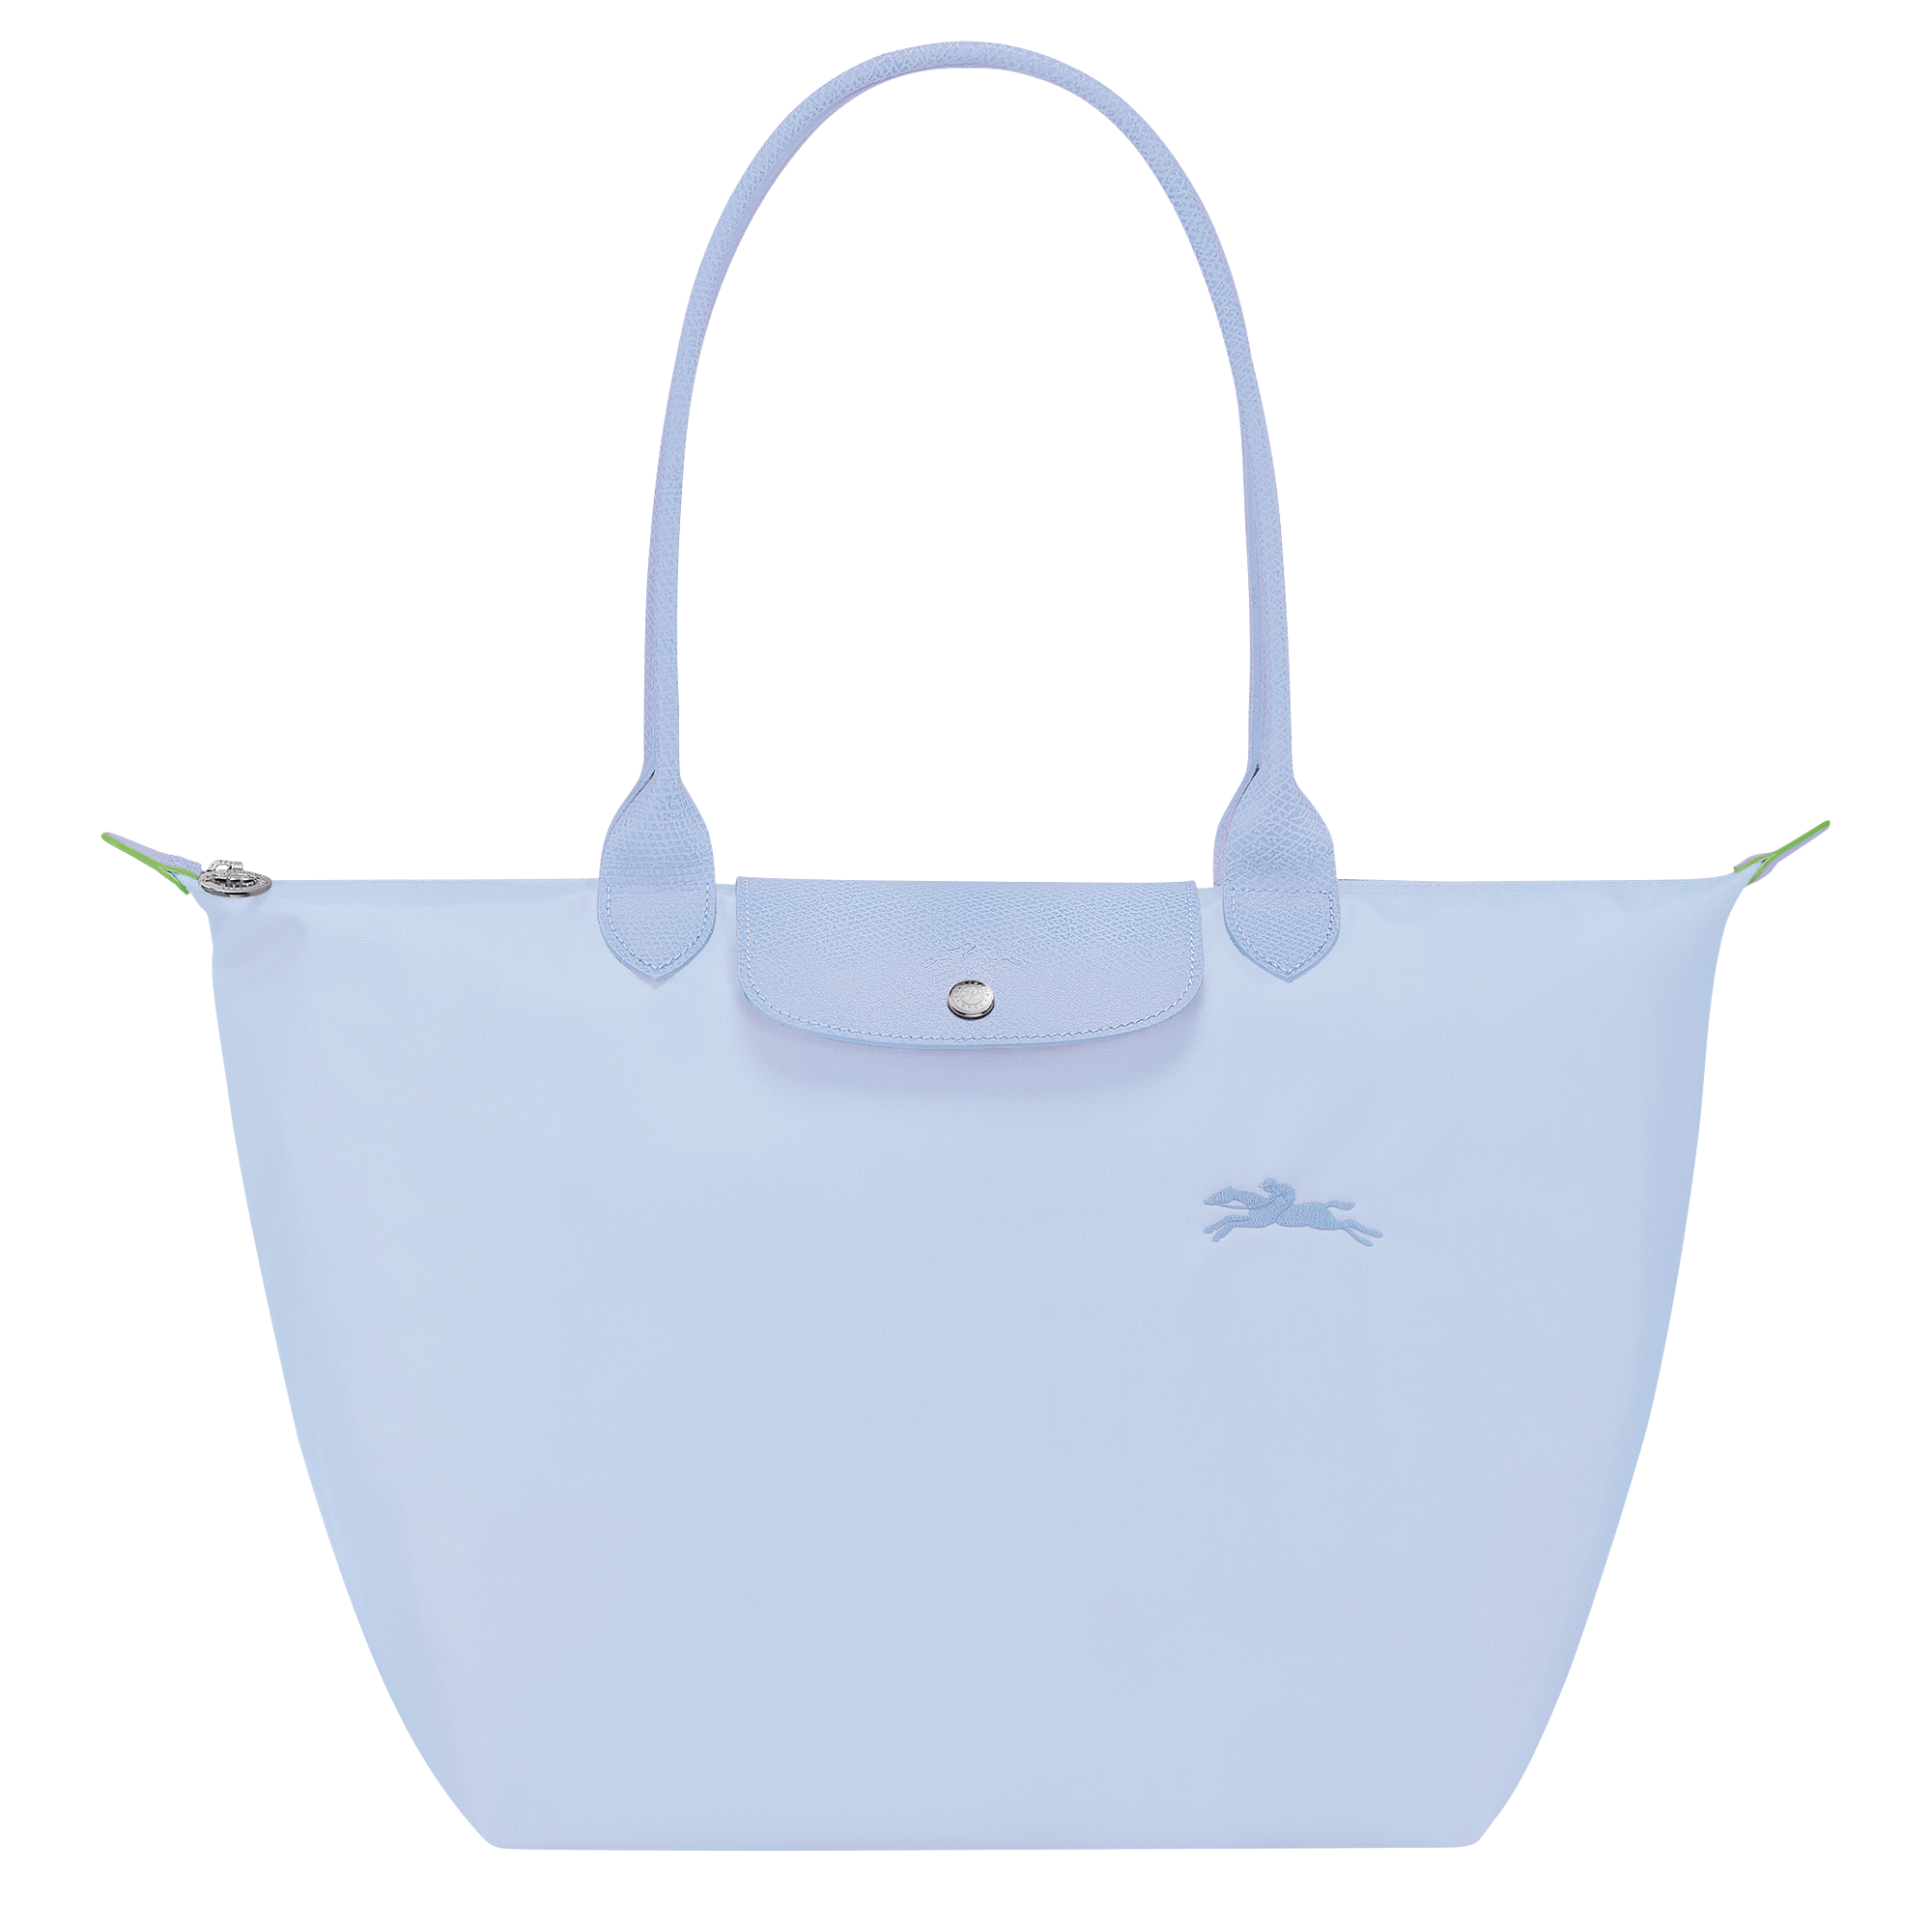 Le Pliage Green Pouch with handle Sky Blue - Recycled canvas (34175919P79)